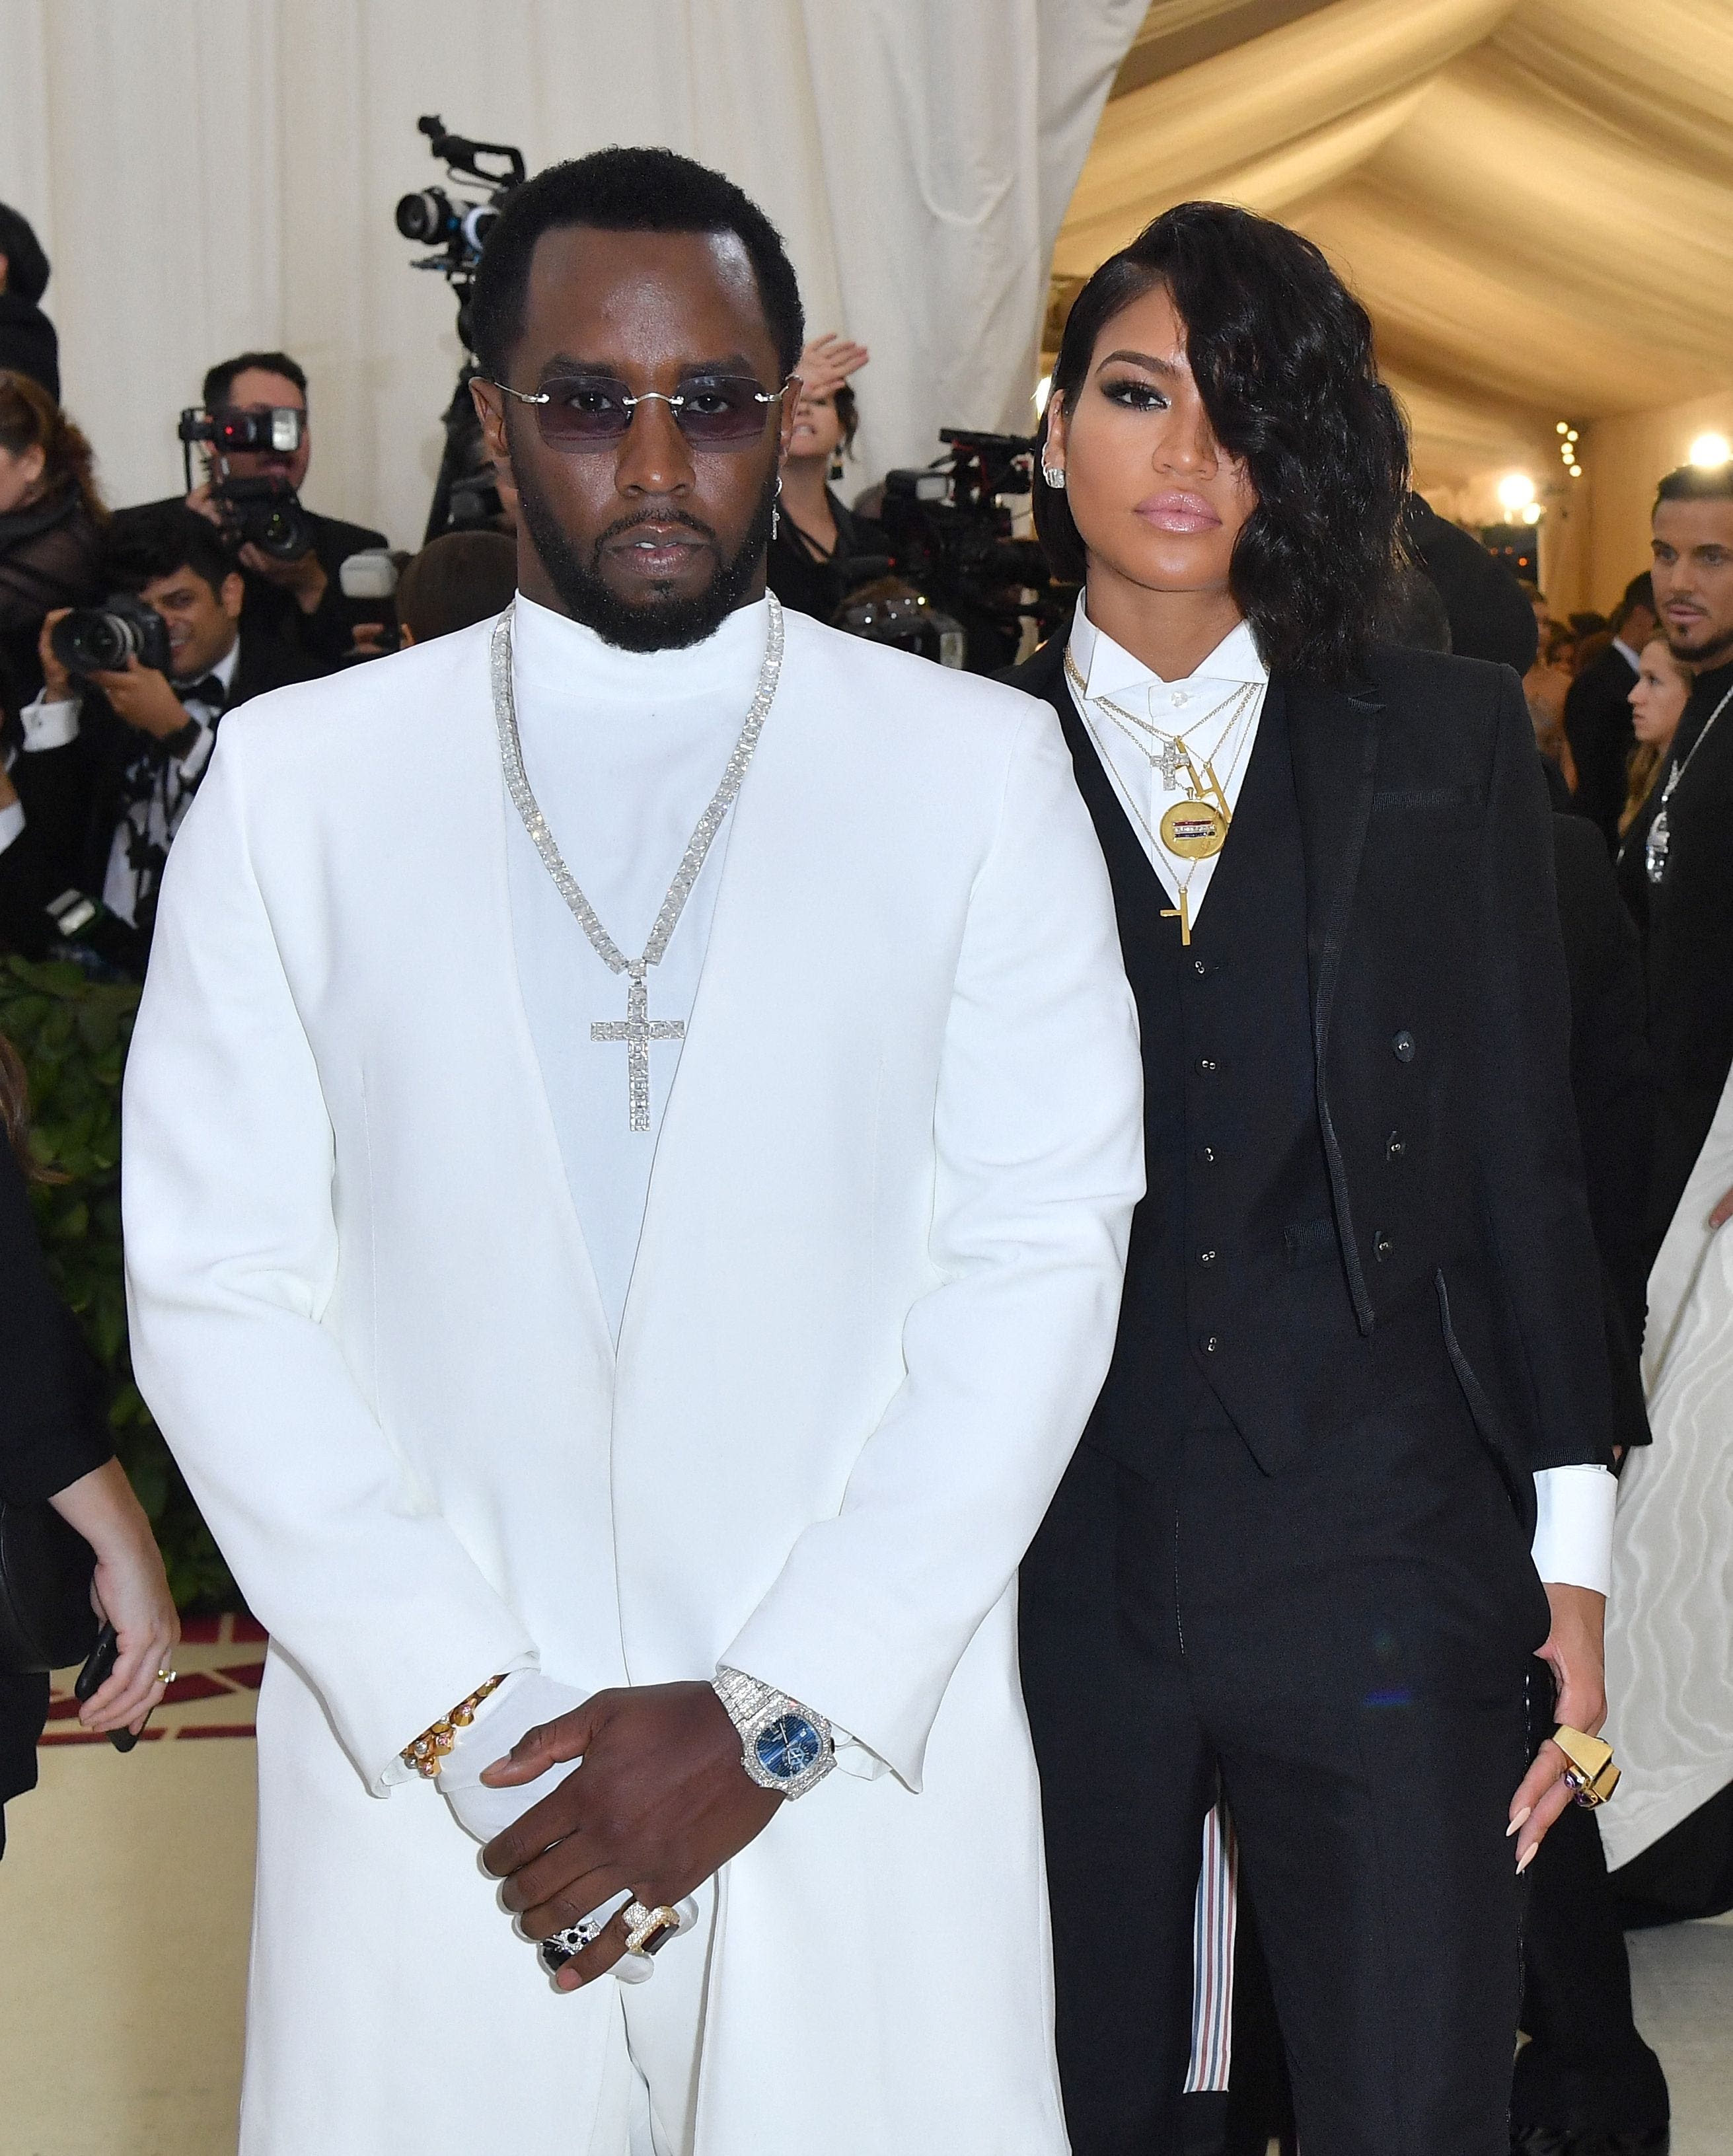 Sean 'Diddy' Combs can't be prosecuted over 2016 video, LA DA says. Here's why.